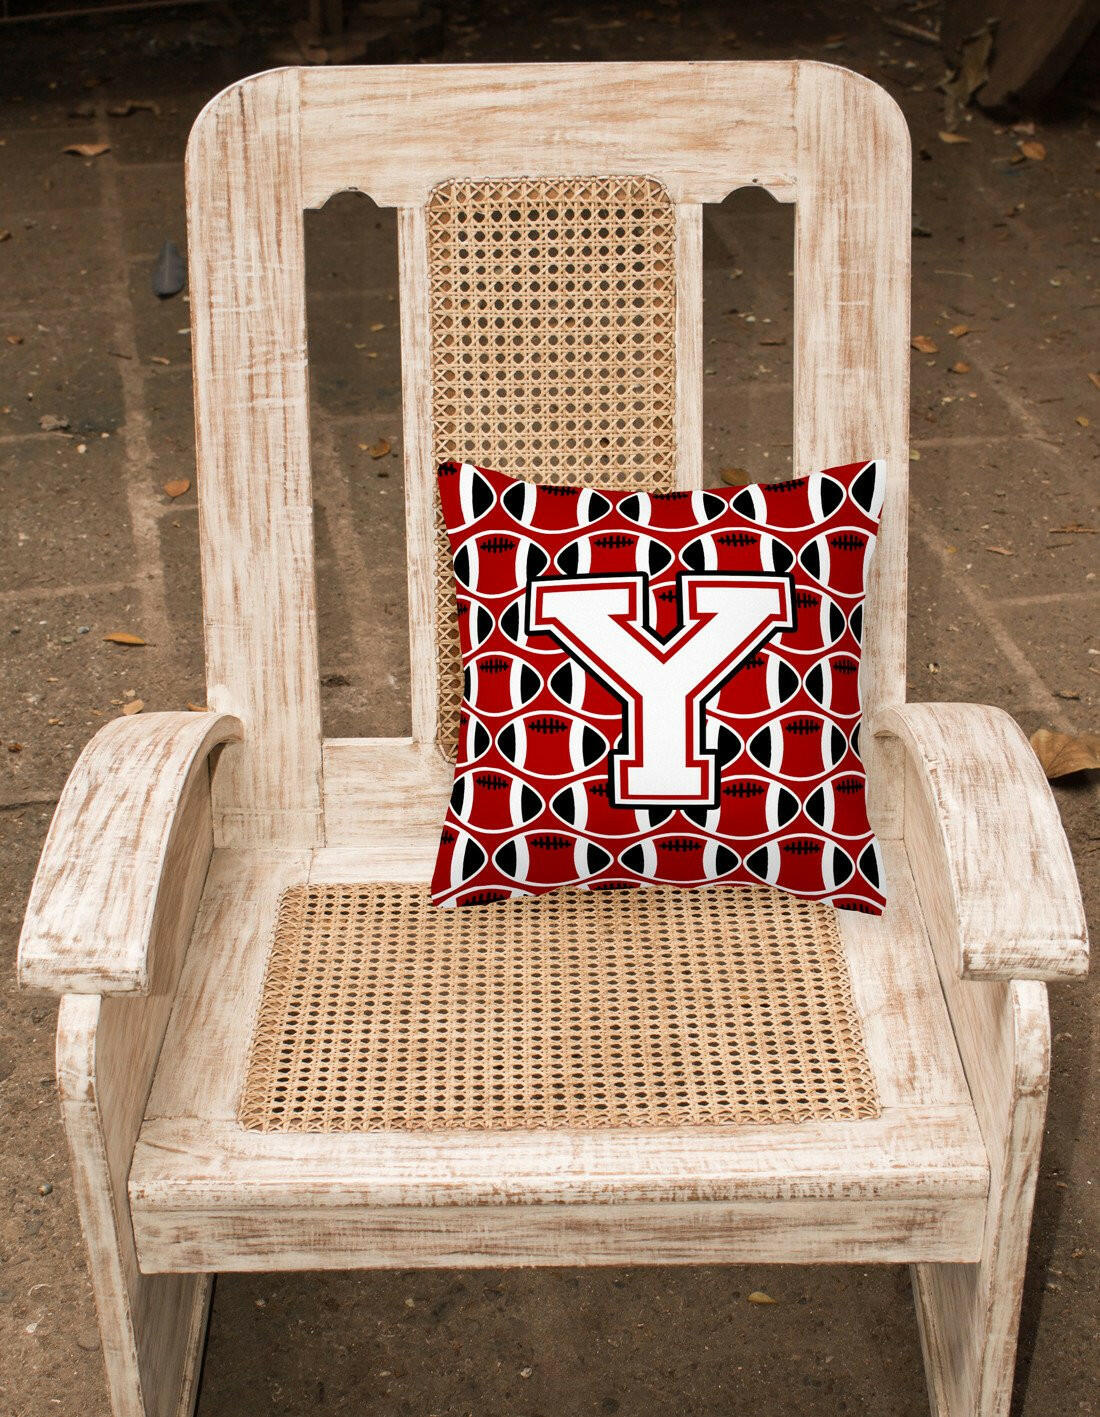 Letter Y Football Cardinal and White Fabric Decorative Pillow CJ1082-YPW1414 by Caroline's Treasures